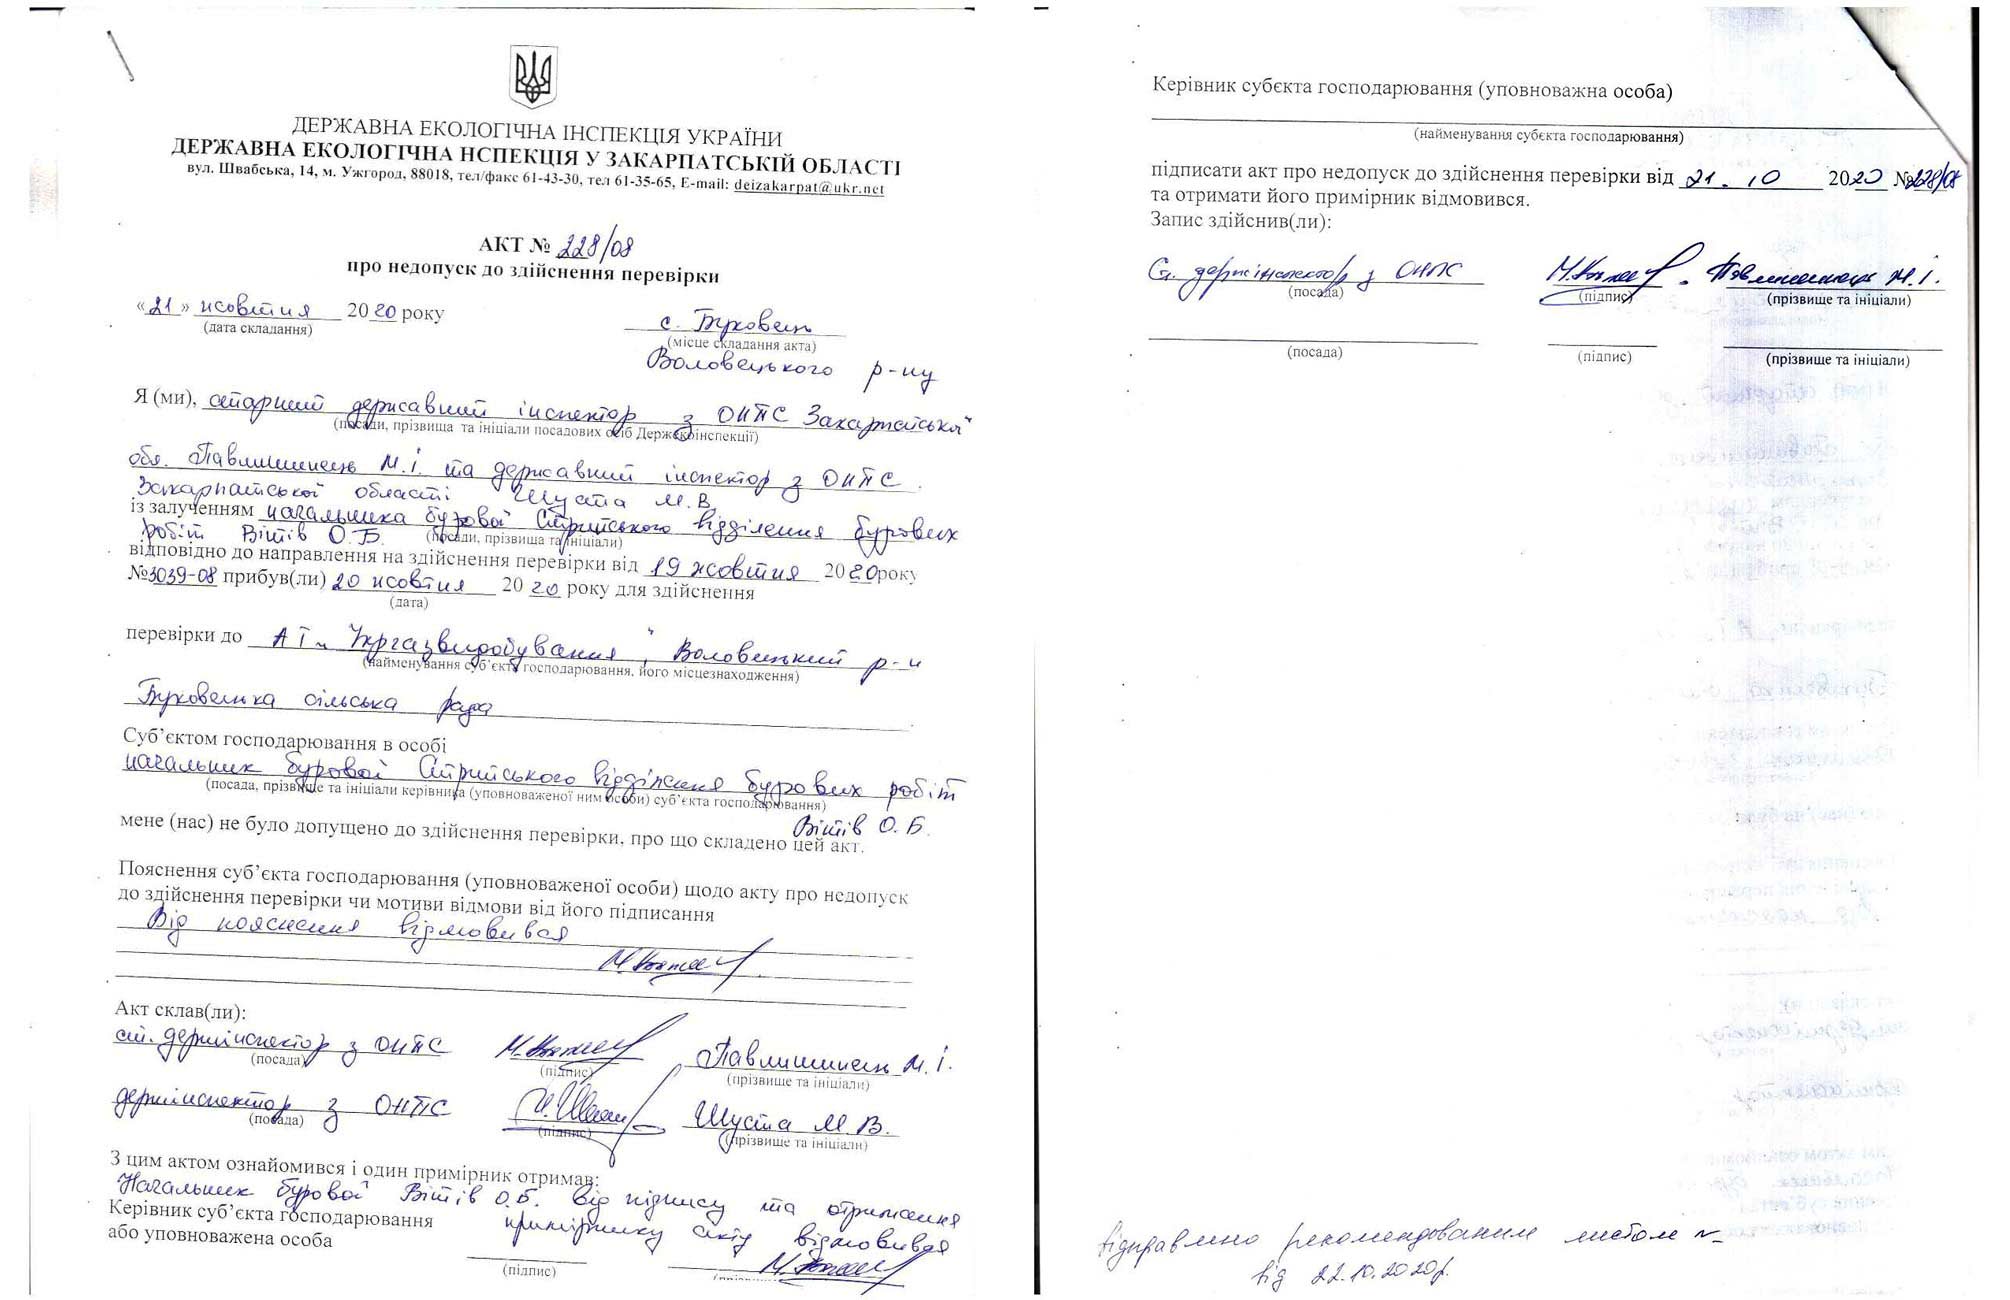 Act on non-admission of the State Ecological Inspectorate to inspect the works of Ukrgazvydobuvannya